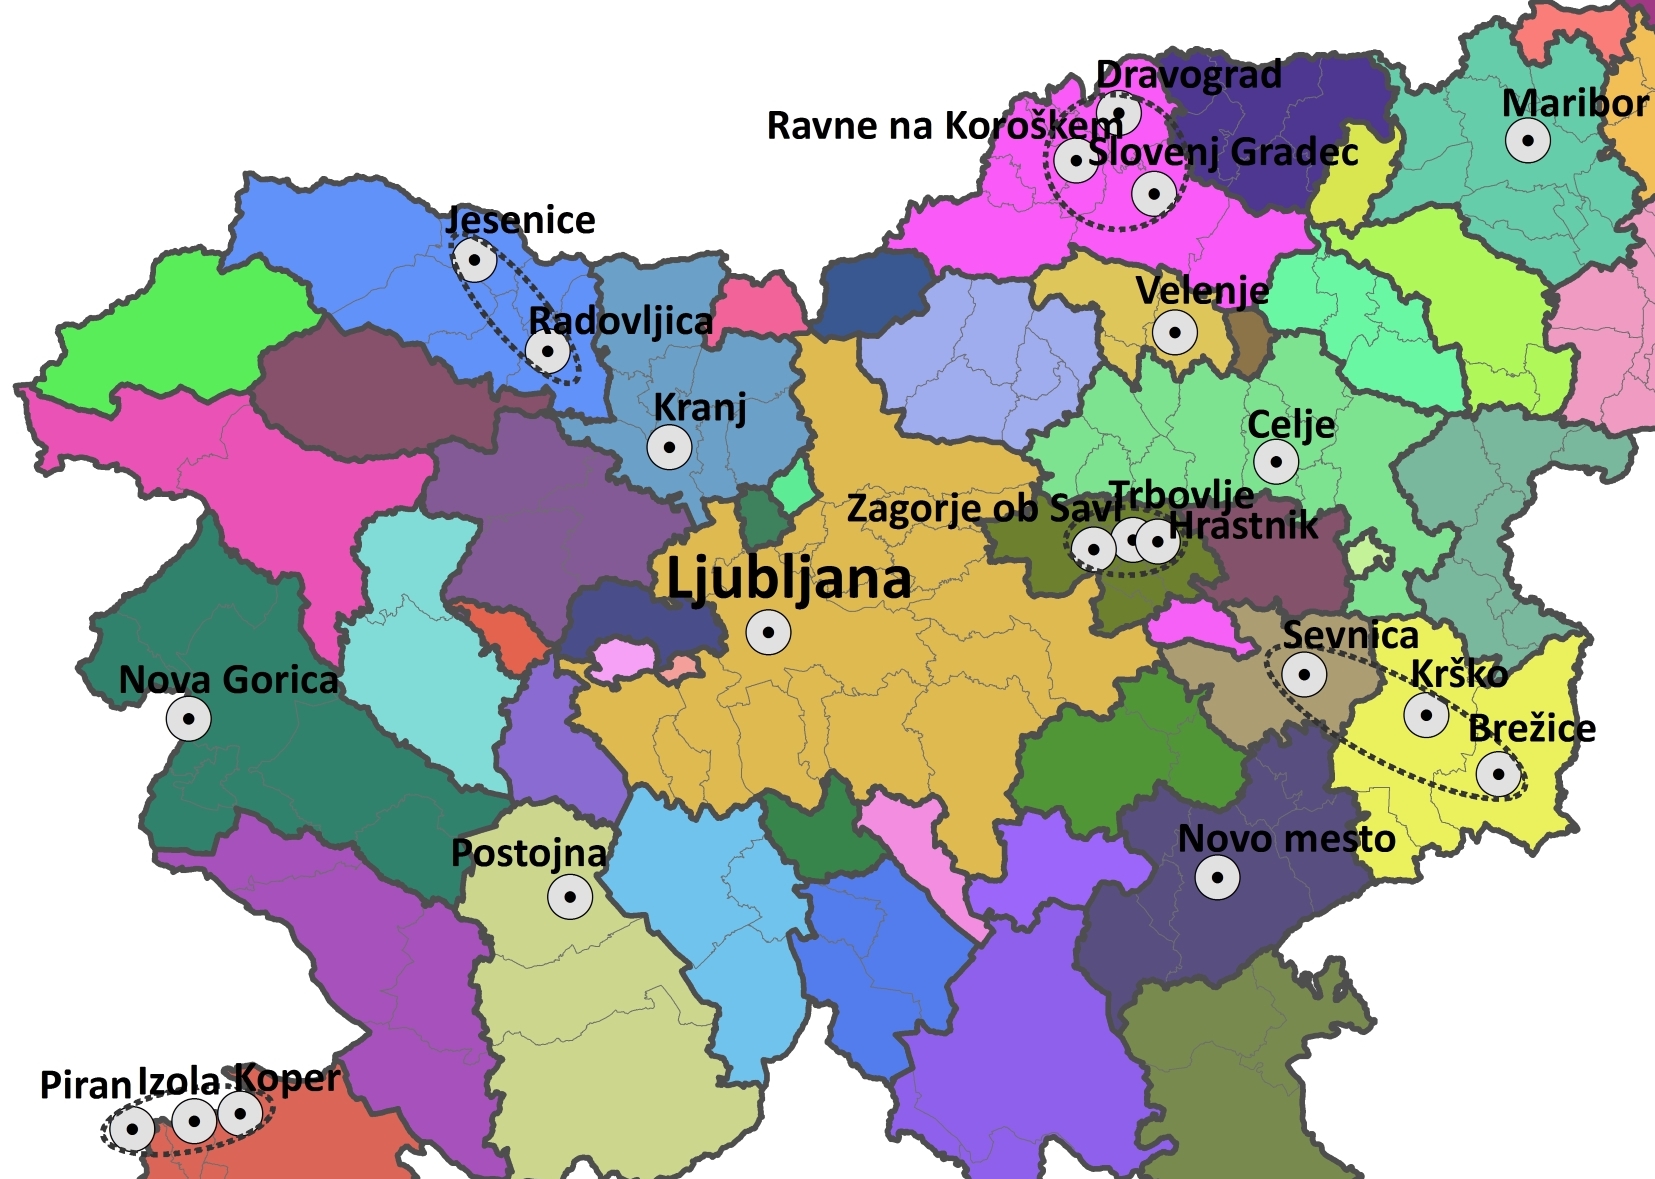 58 functional regions modelled by Intramax procedure using Smart’s weighted objective function and regional centres of Slovenia, 2011. 